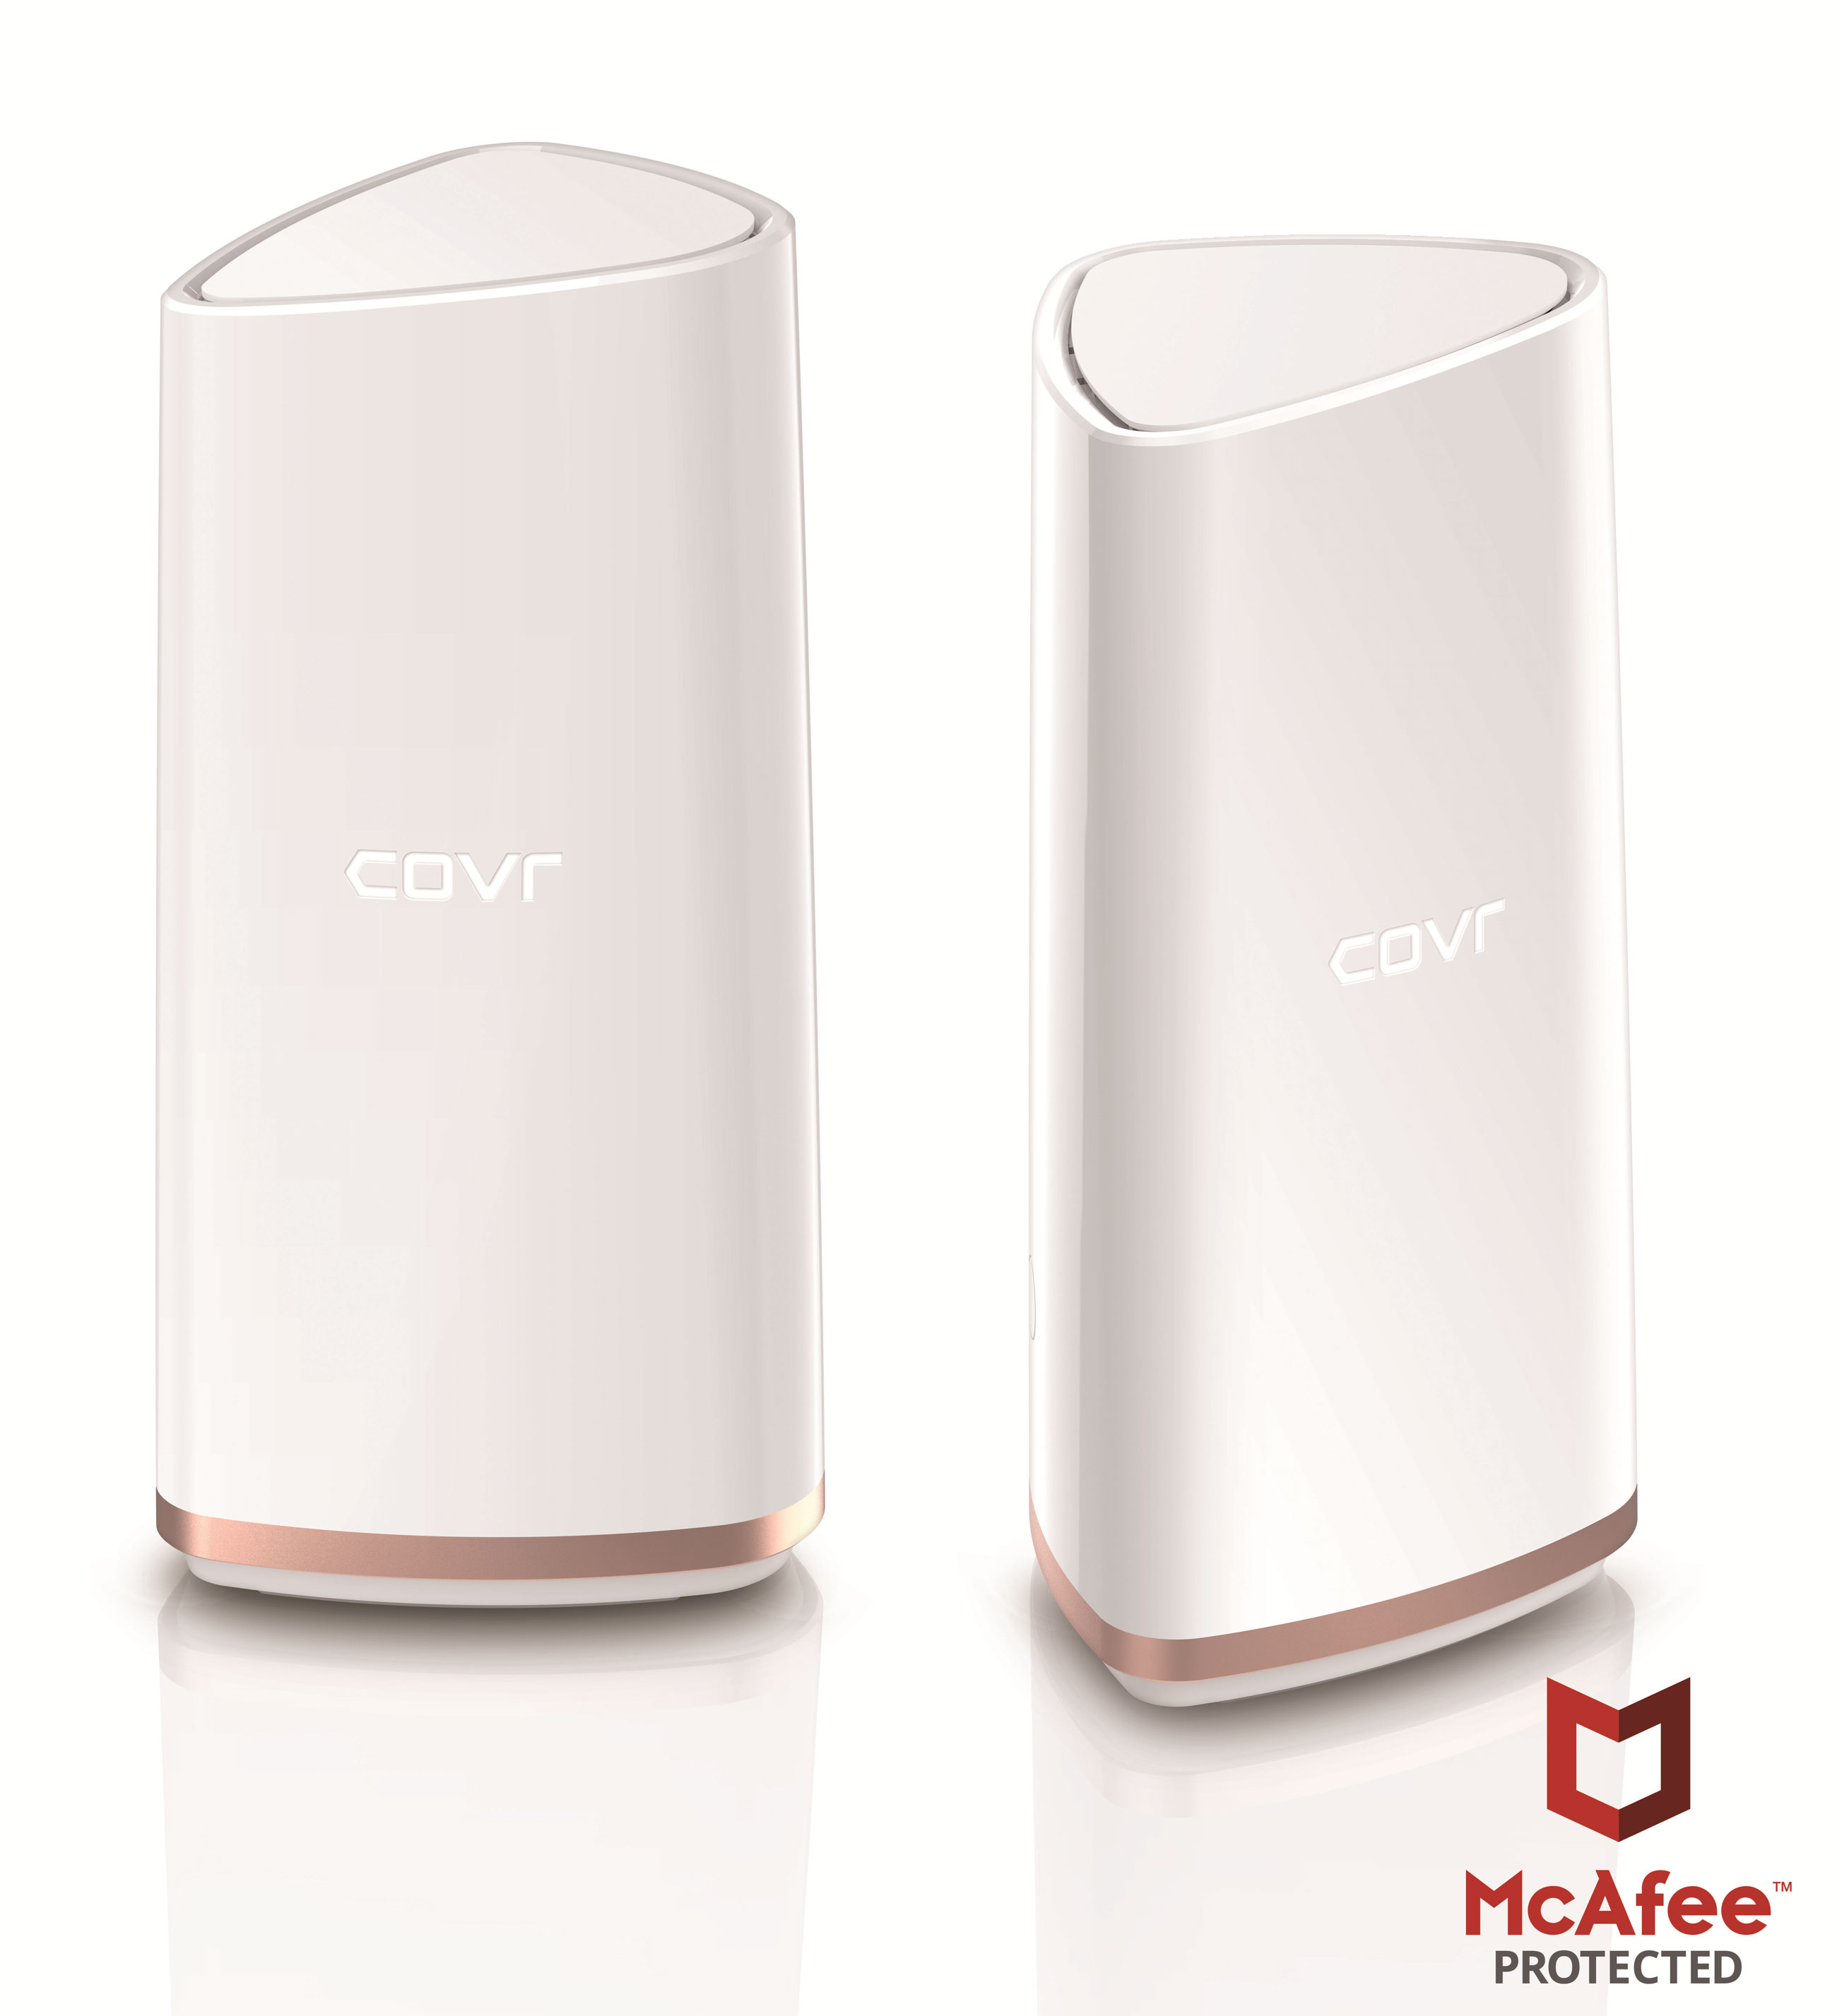 COVR-2202 D-Link adds McAfee Protection to its Covr AC2200 Tri-Band  Whole Home Mesh Wi-Fi System